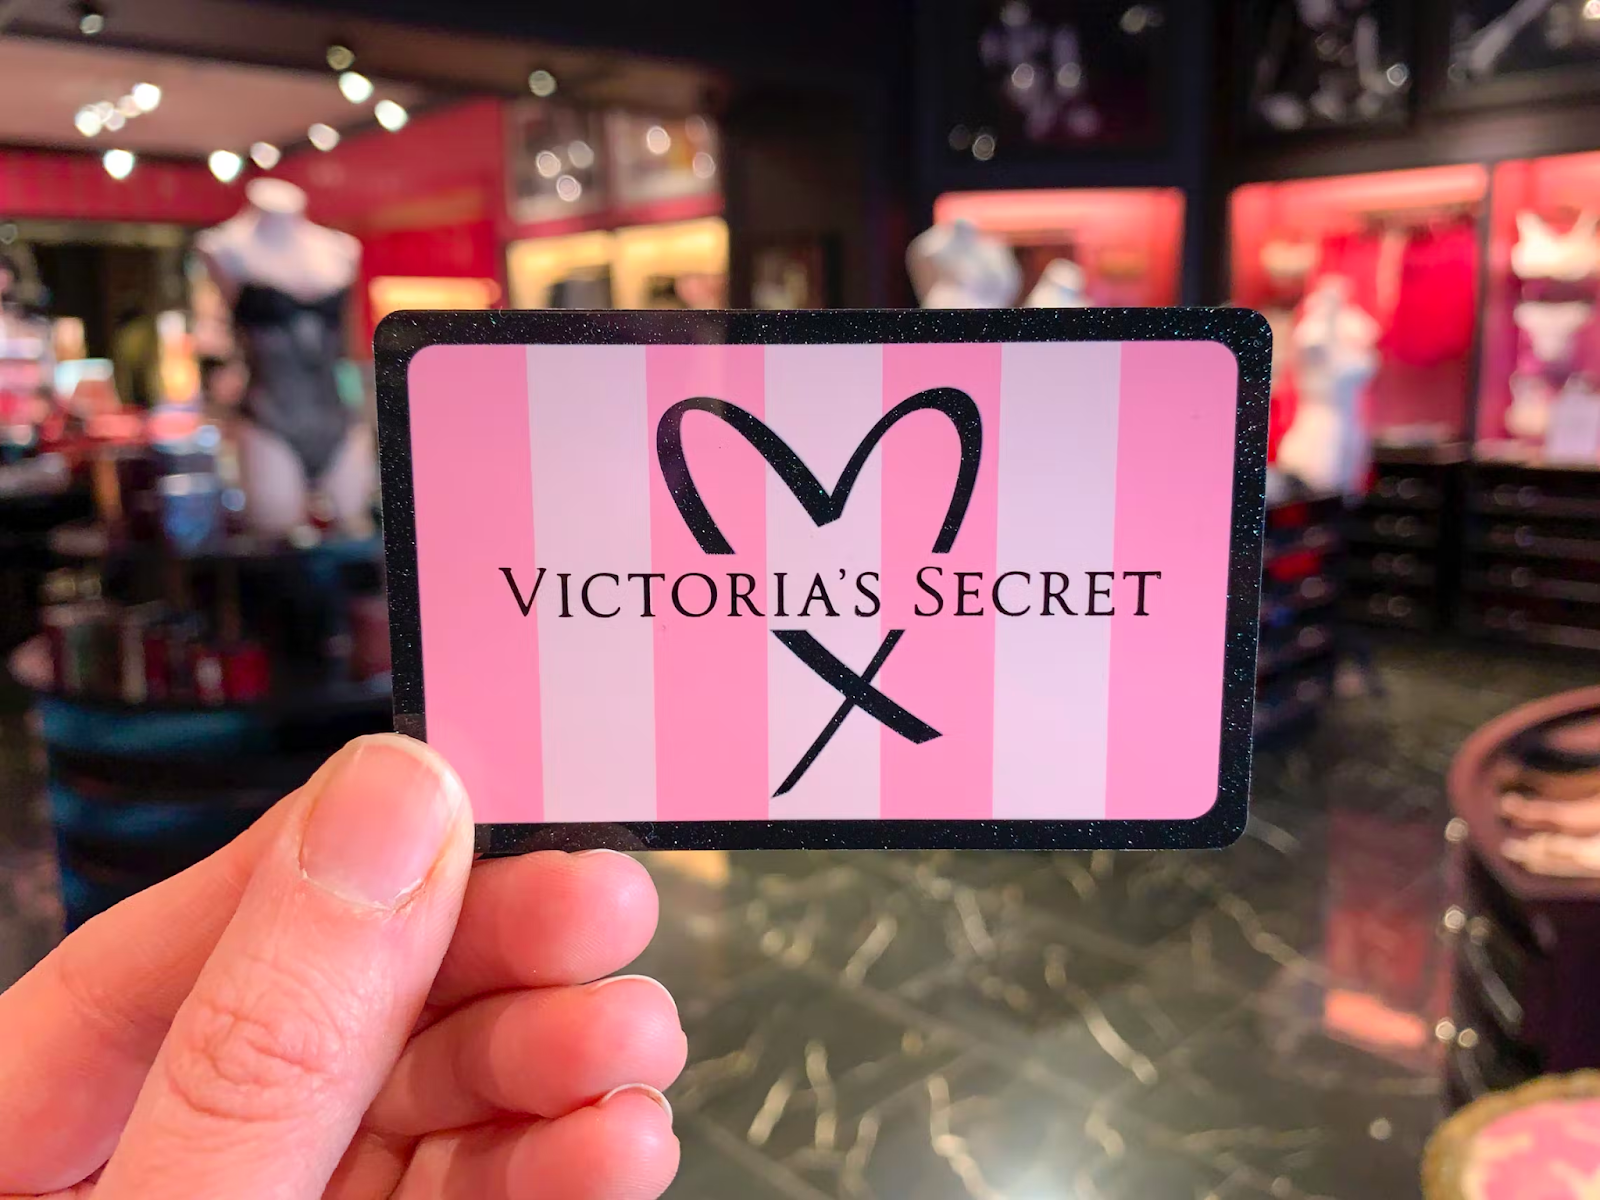 Buy Victoria's Secret Gift Cards | GiftCardGranny